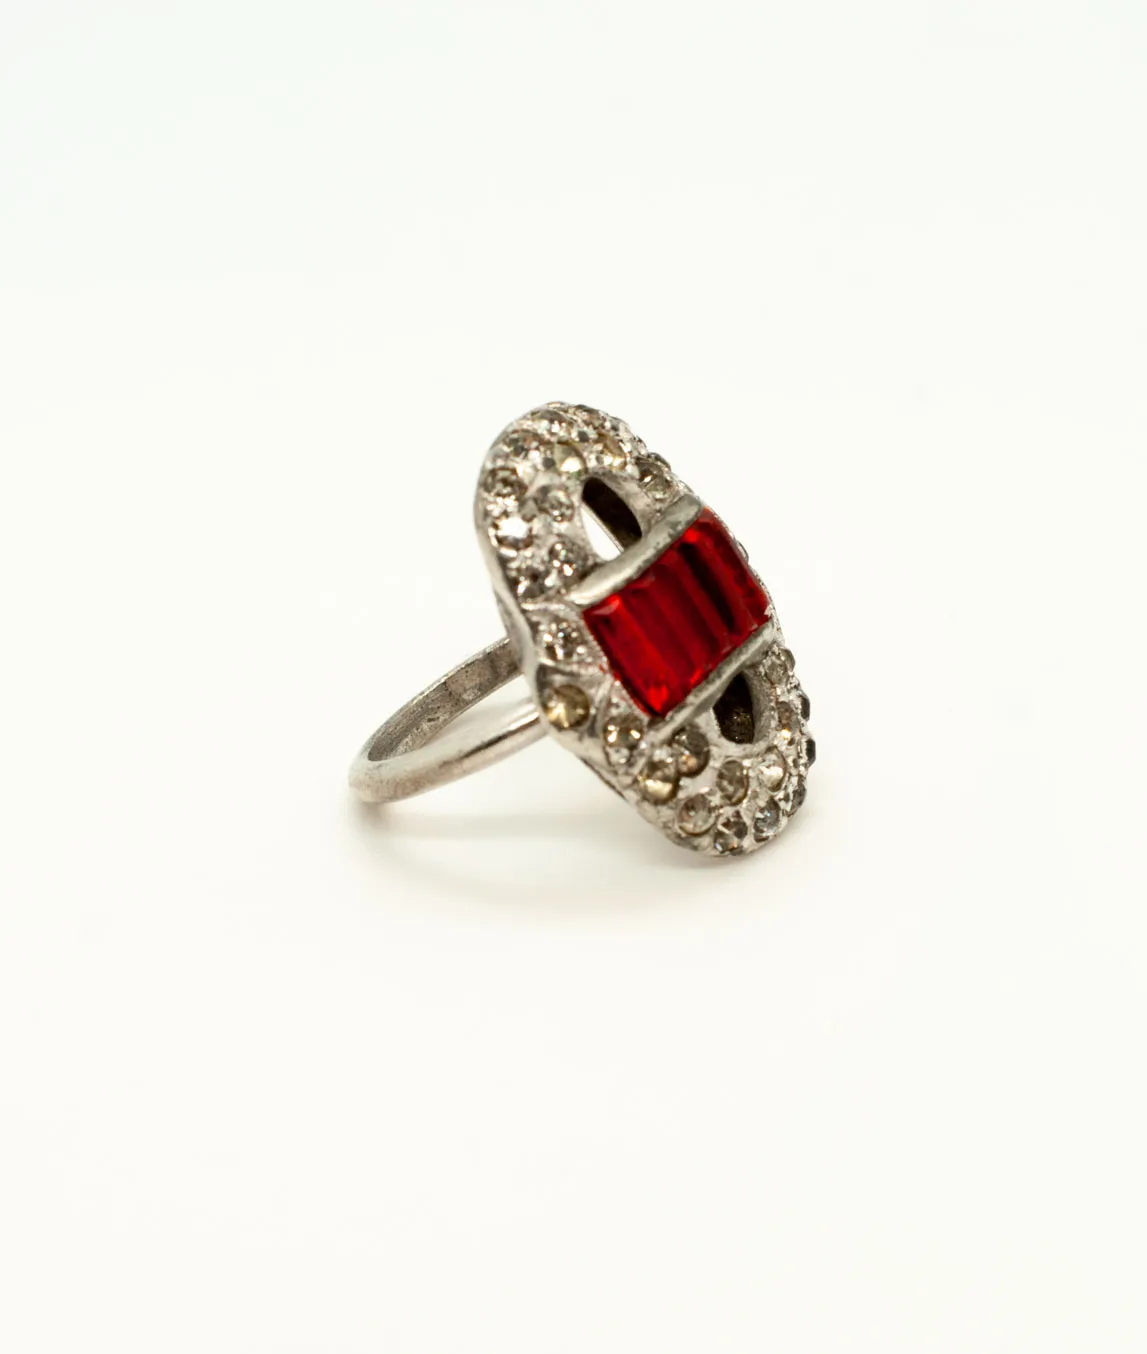 Silver and red Art Deco ring